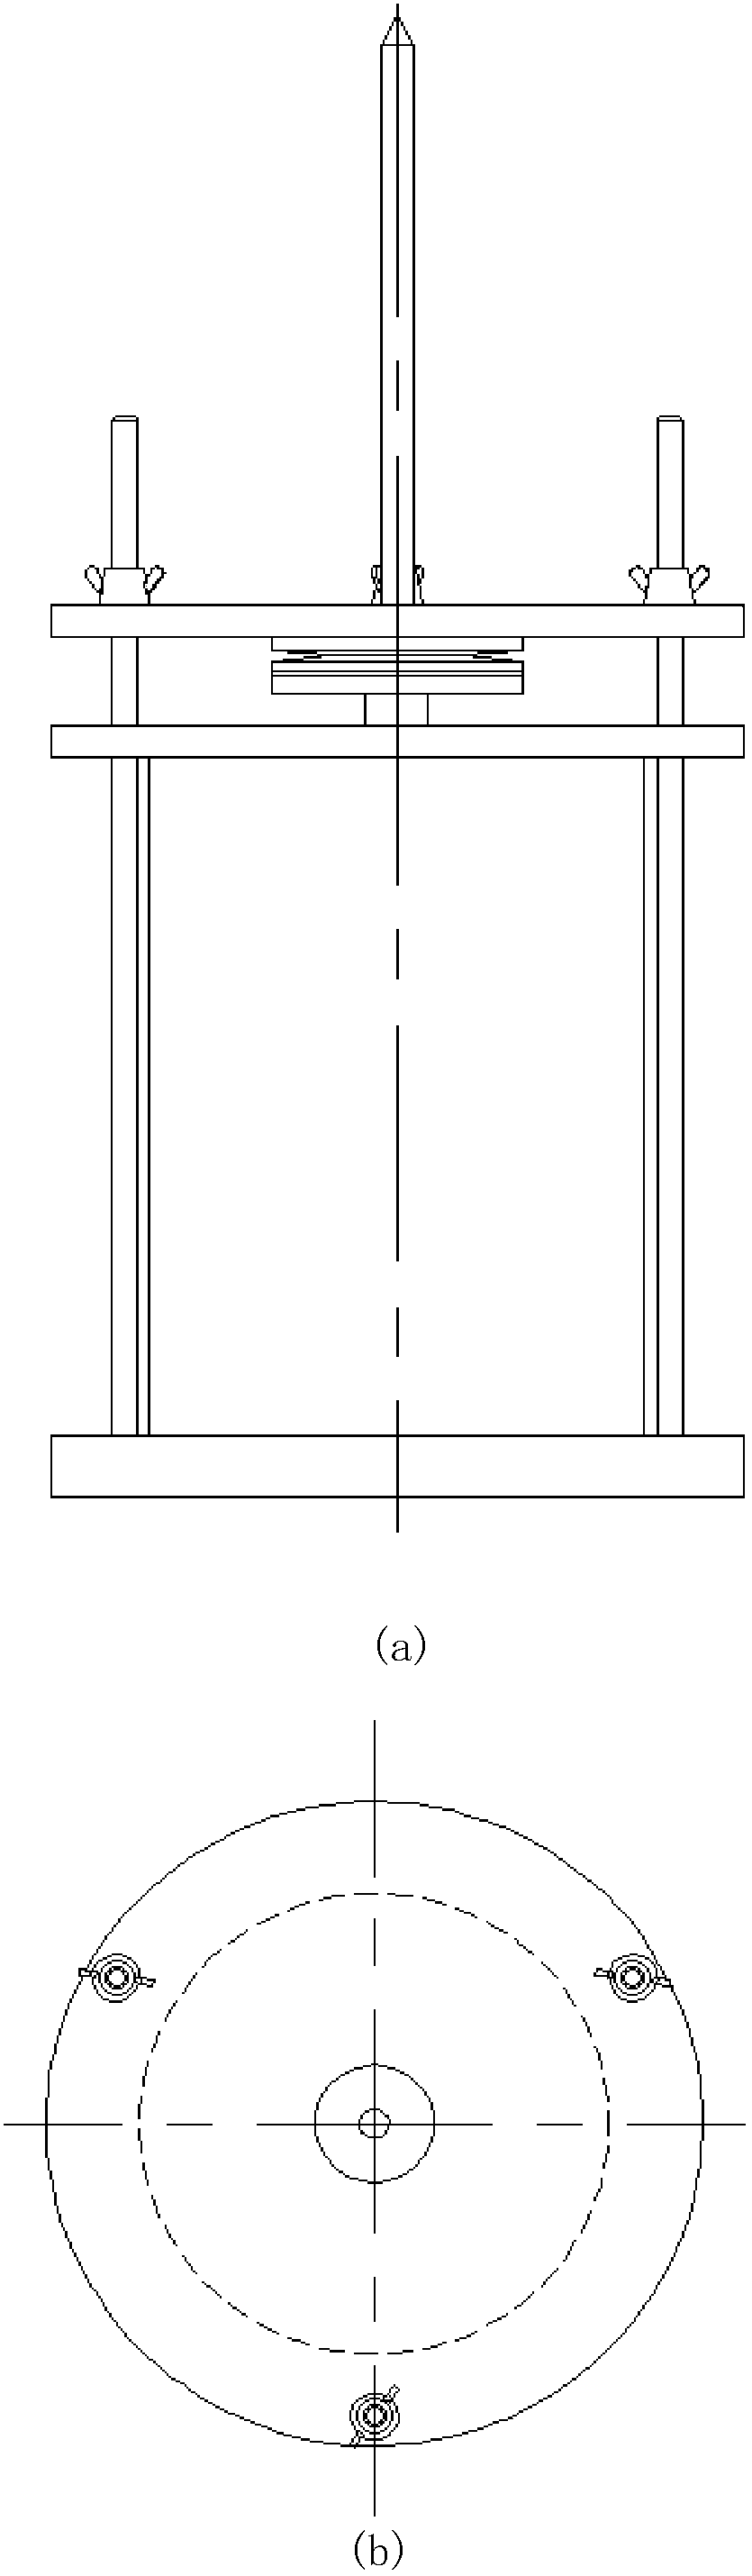 Two-stage magnetostrictive galvanometer deflection drive mechanism